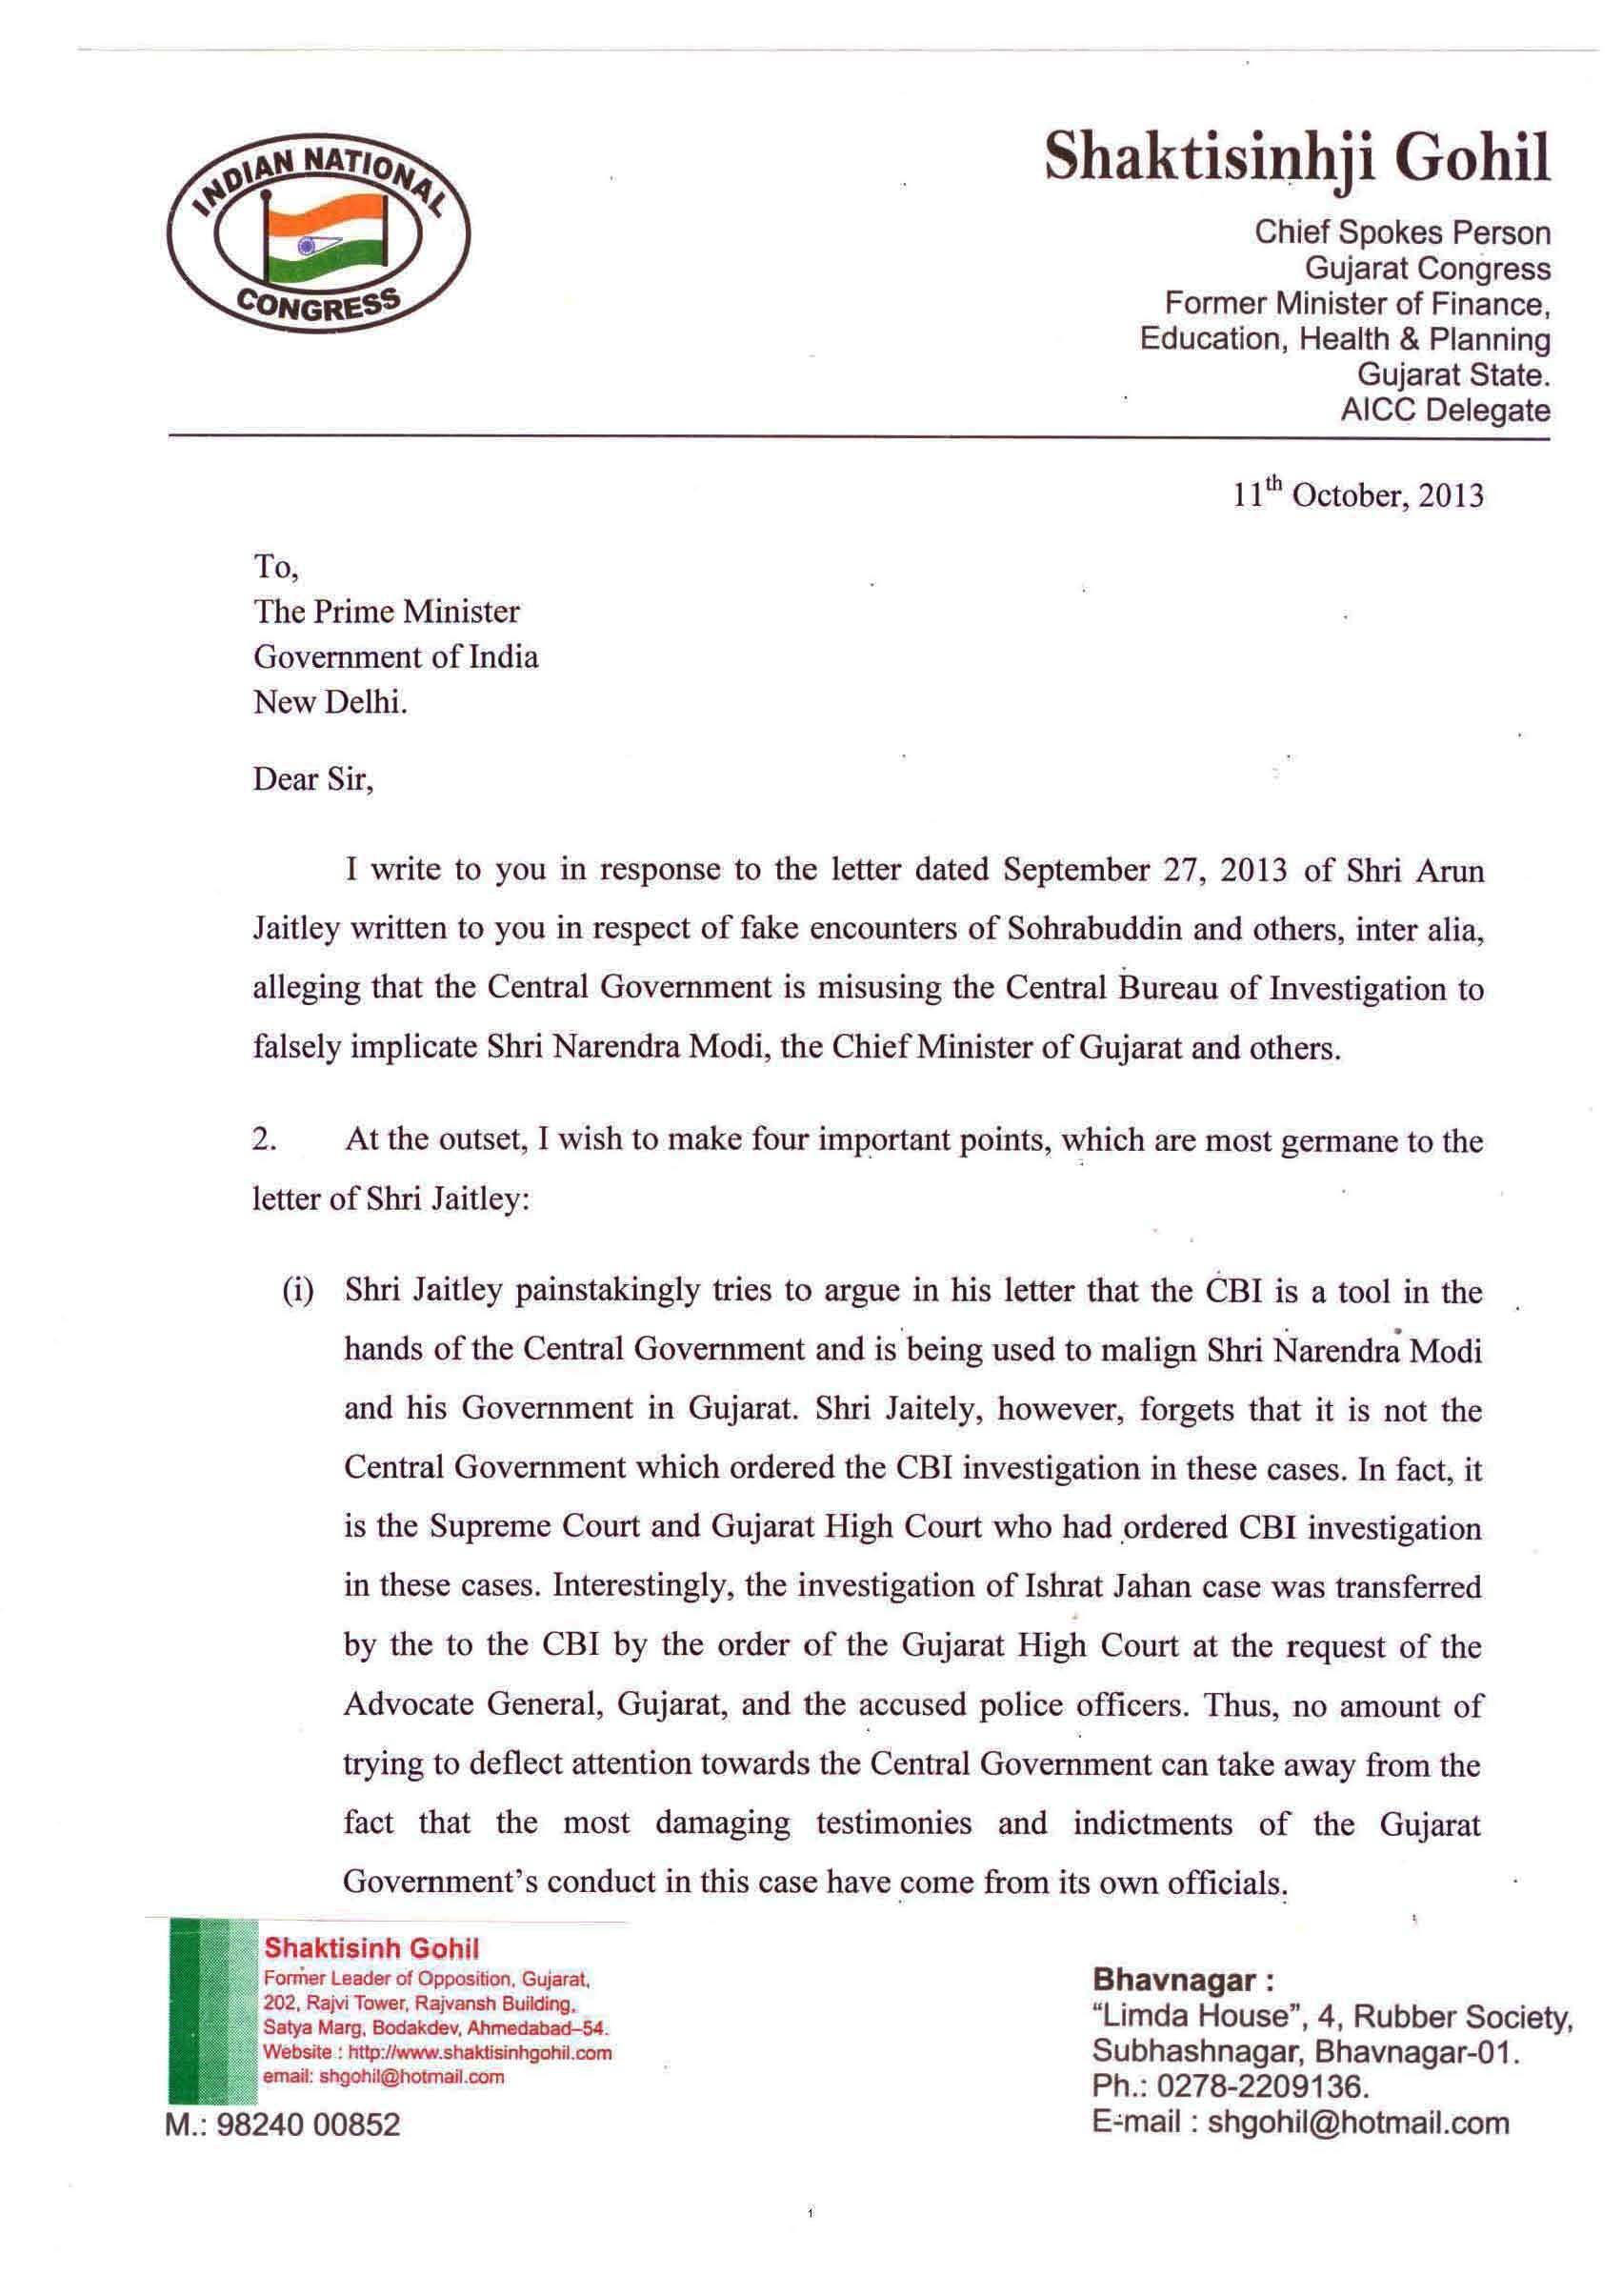 Letter to The Prime Minister in response to the letter of Shri